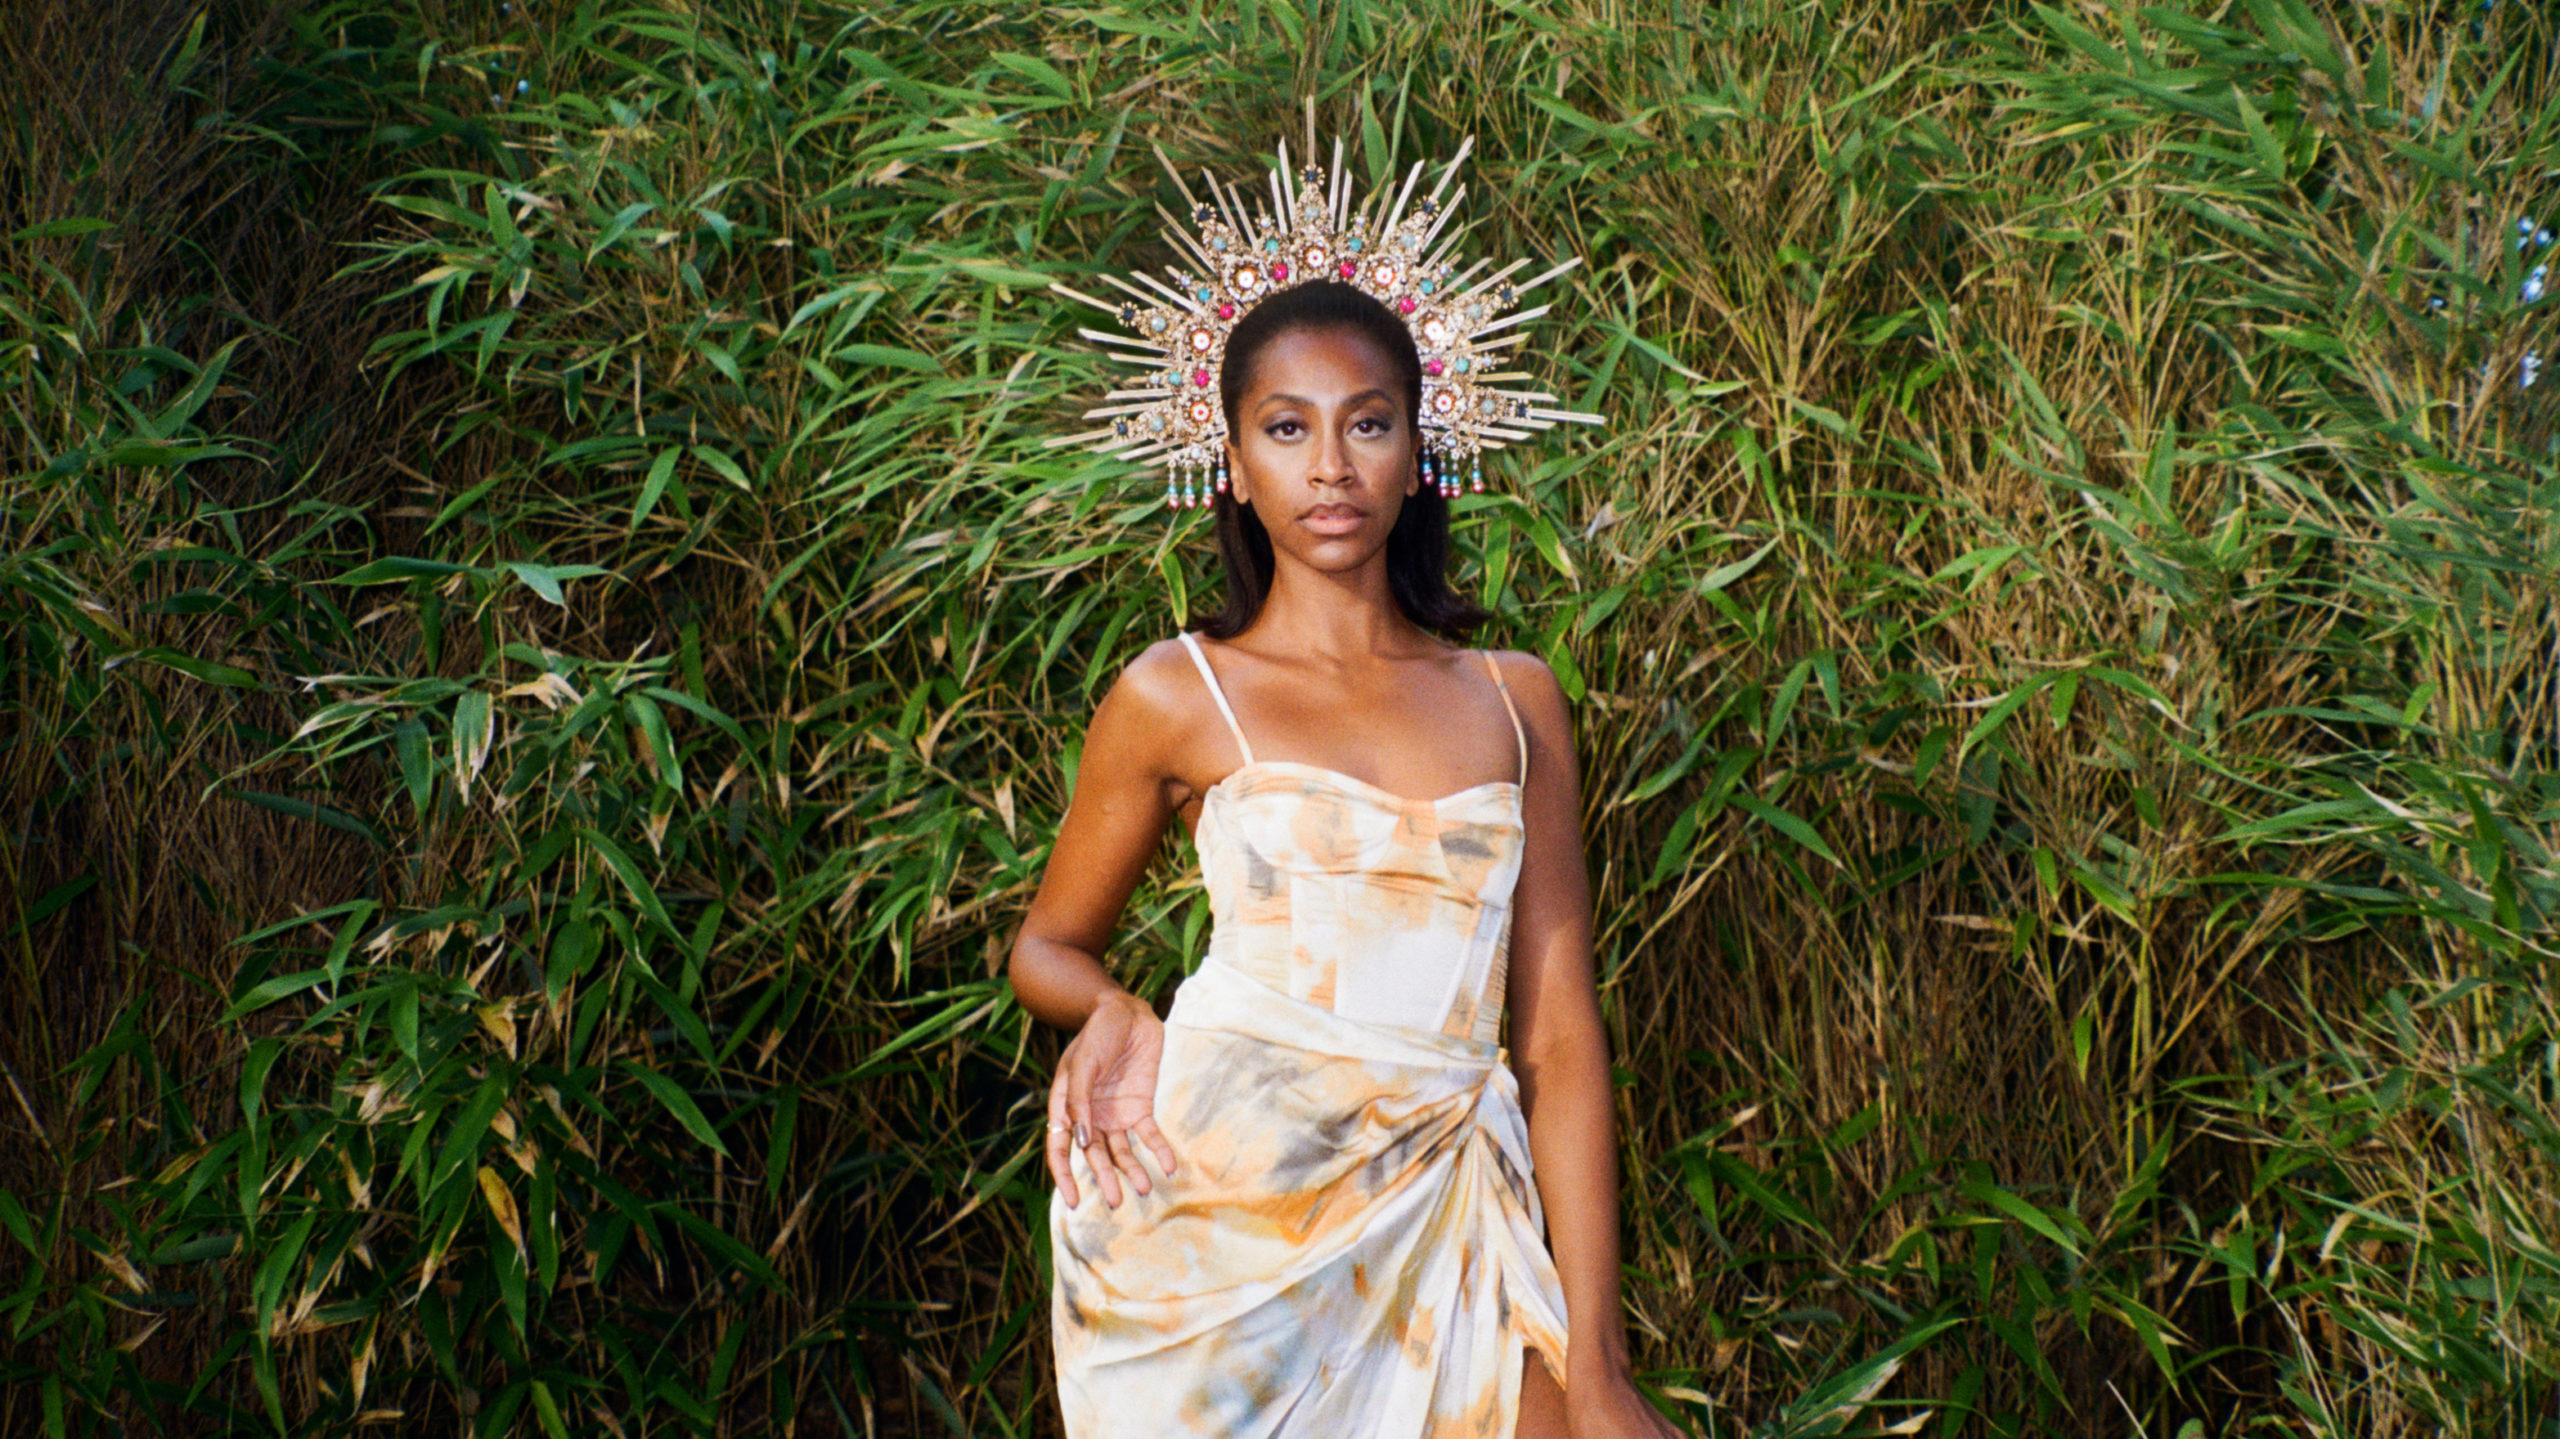 Artist ANISE embodies Black Eve in this photo series captured by Bonnie Paul